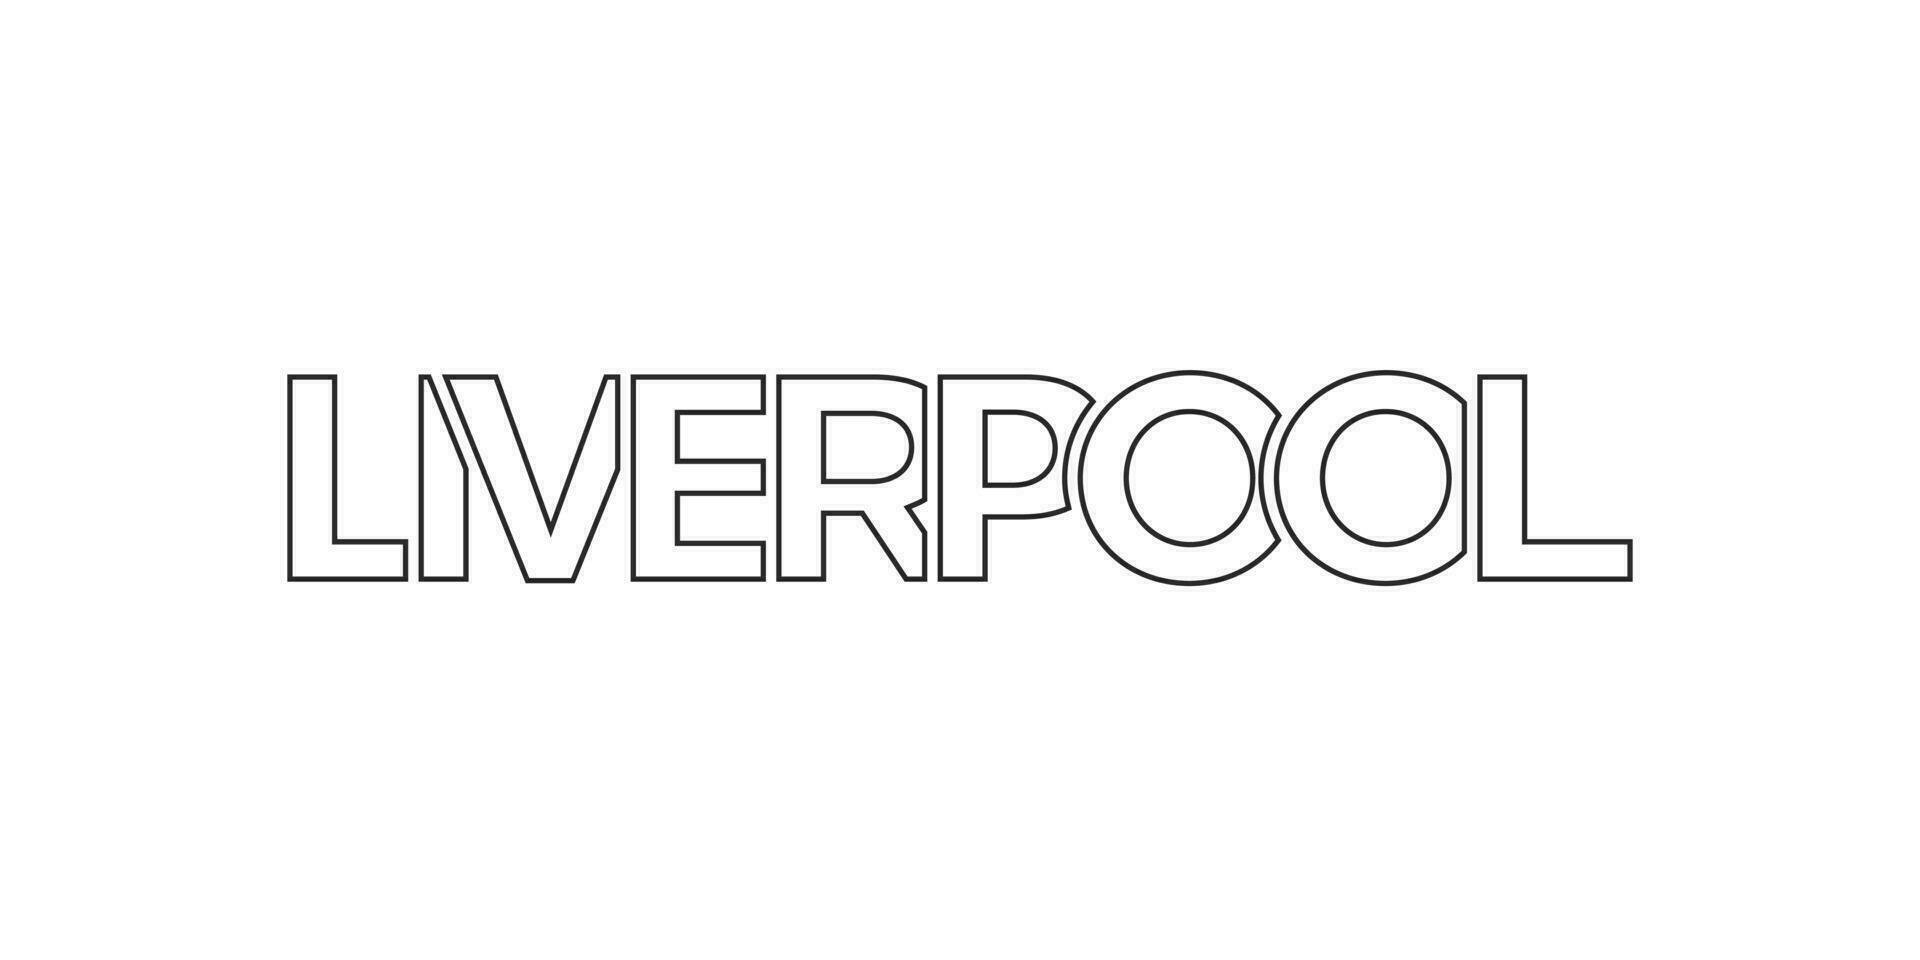 Liverpool city in the United Kingdom design features a geometric style illustration with bold typography in a modern font on white background. vector